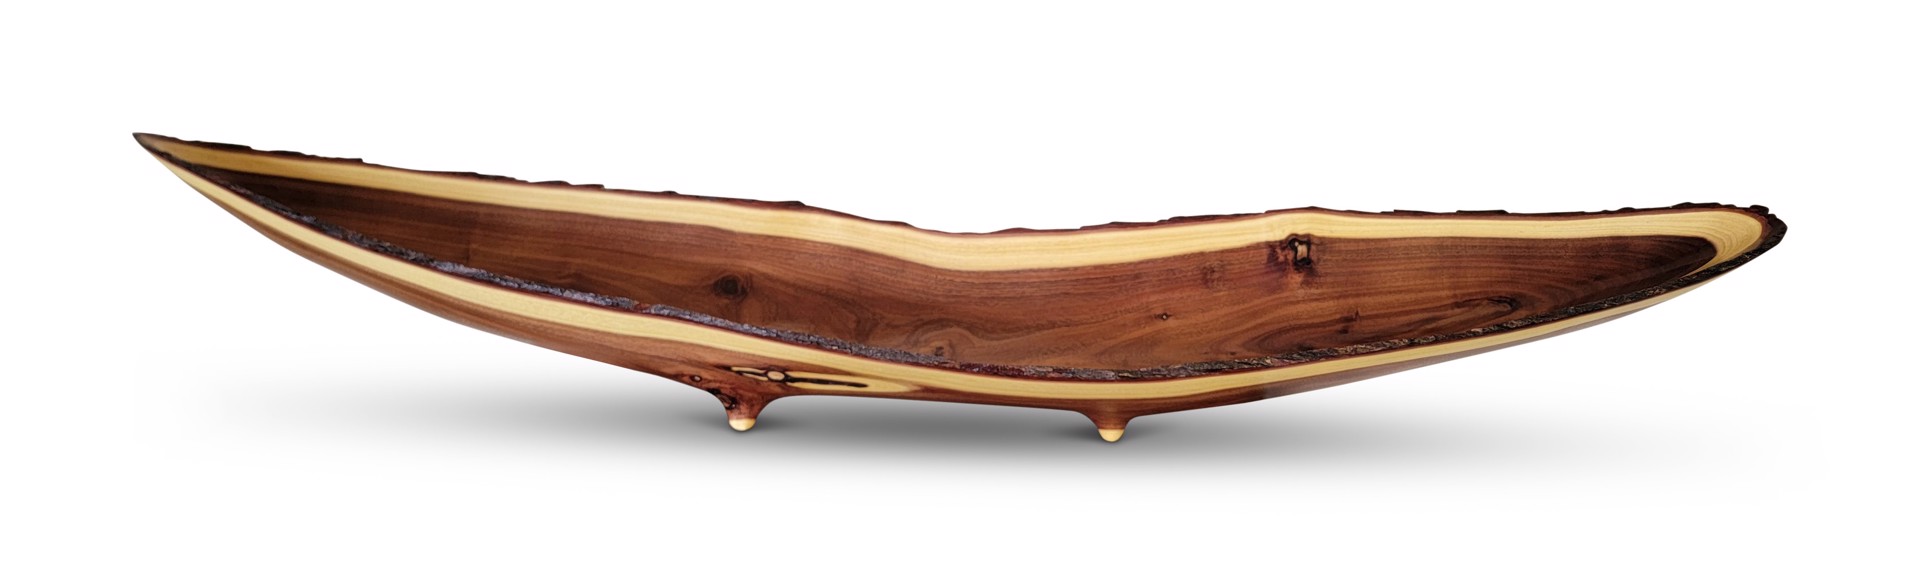 Acacia Boat - 4ft Boat Shaped Vessel made from Acacia Wood by Scott & Stephanie Shangraw